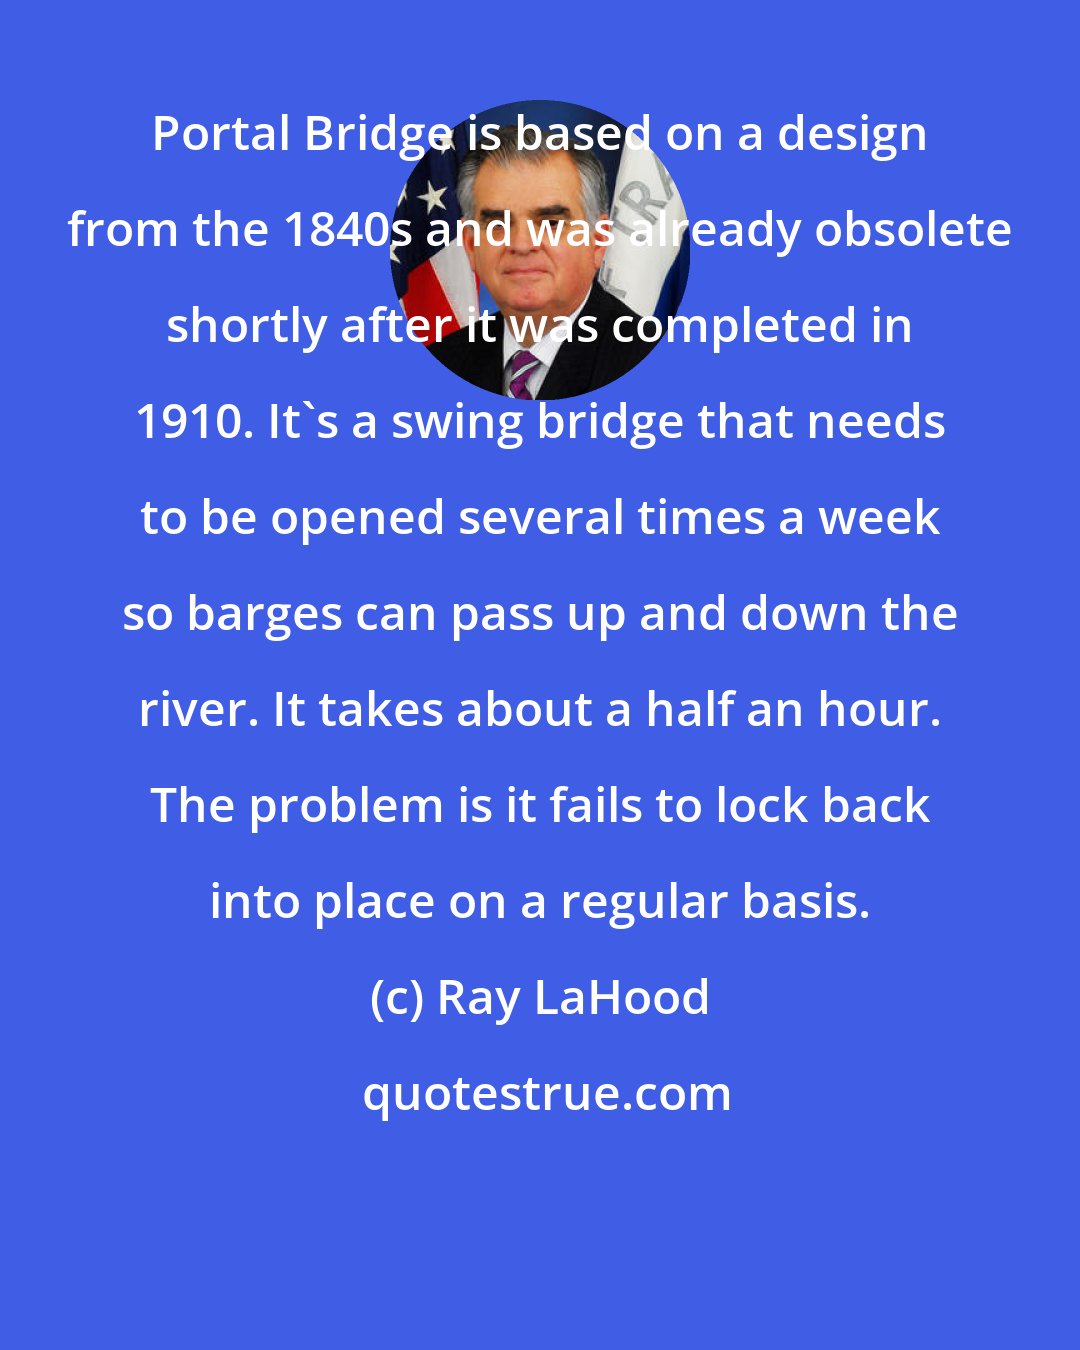 Ray LaHood: Portal Bridge is based on a design from the 1840s and was already obsolete shortly after it was completed in 1910. It's a swing bridge that needs to be opened several times a week so barges can pass up and down the river. It takes about a half an hour. The problem is it fails to lock back into place on a regular basis.